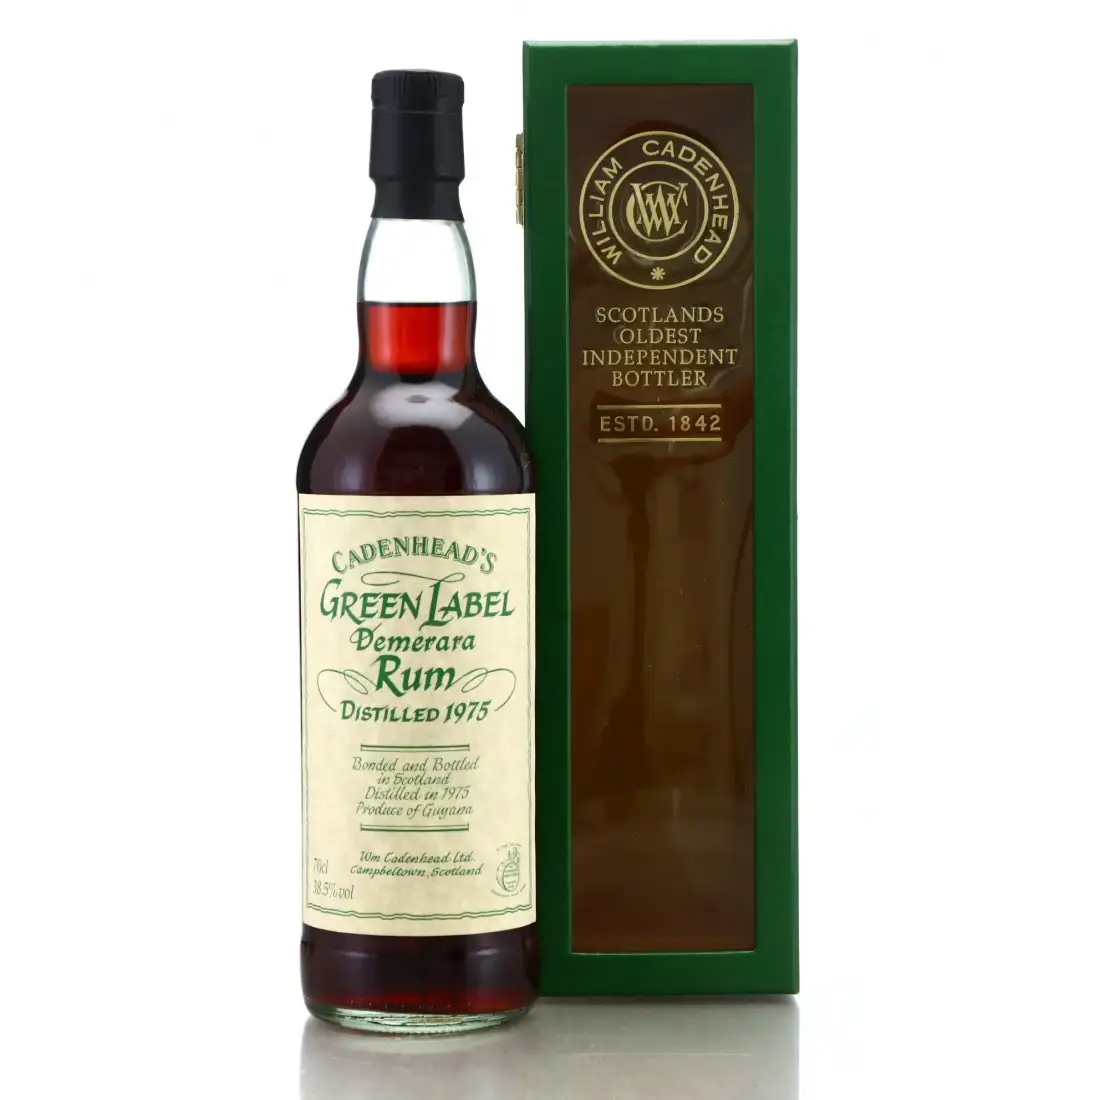 Image of the front of the bottle of the rum Green Label Demerara Rum